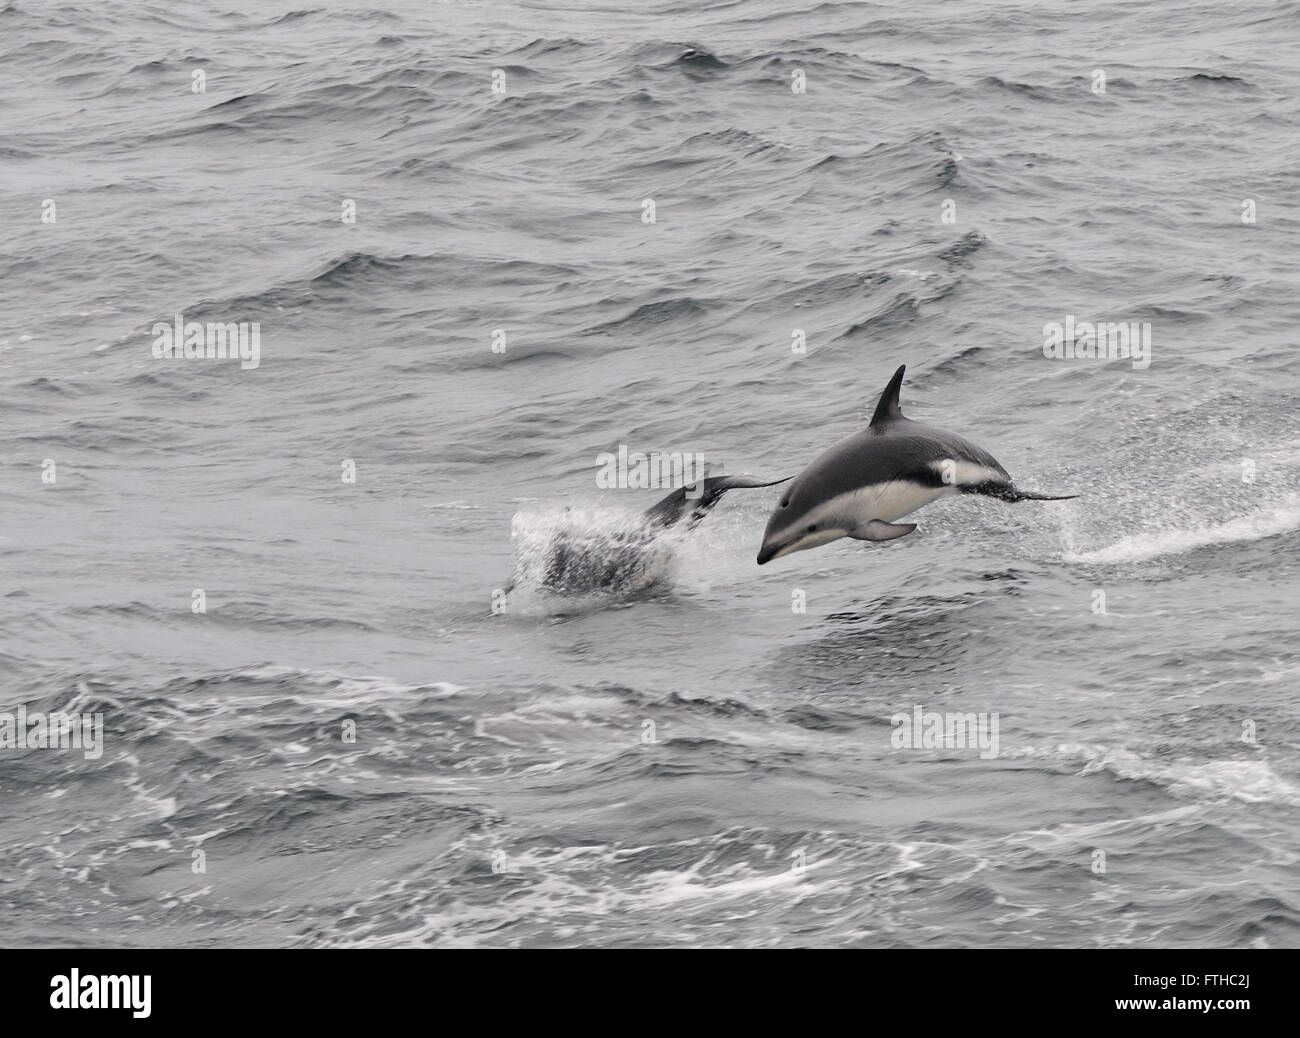 Dusky Dolphins (Lagenorhynchus obscurus) leaping from the sea. Drake Passage, South Atlantic Ocean. Stock Photo